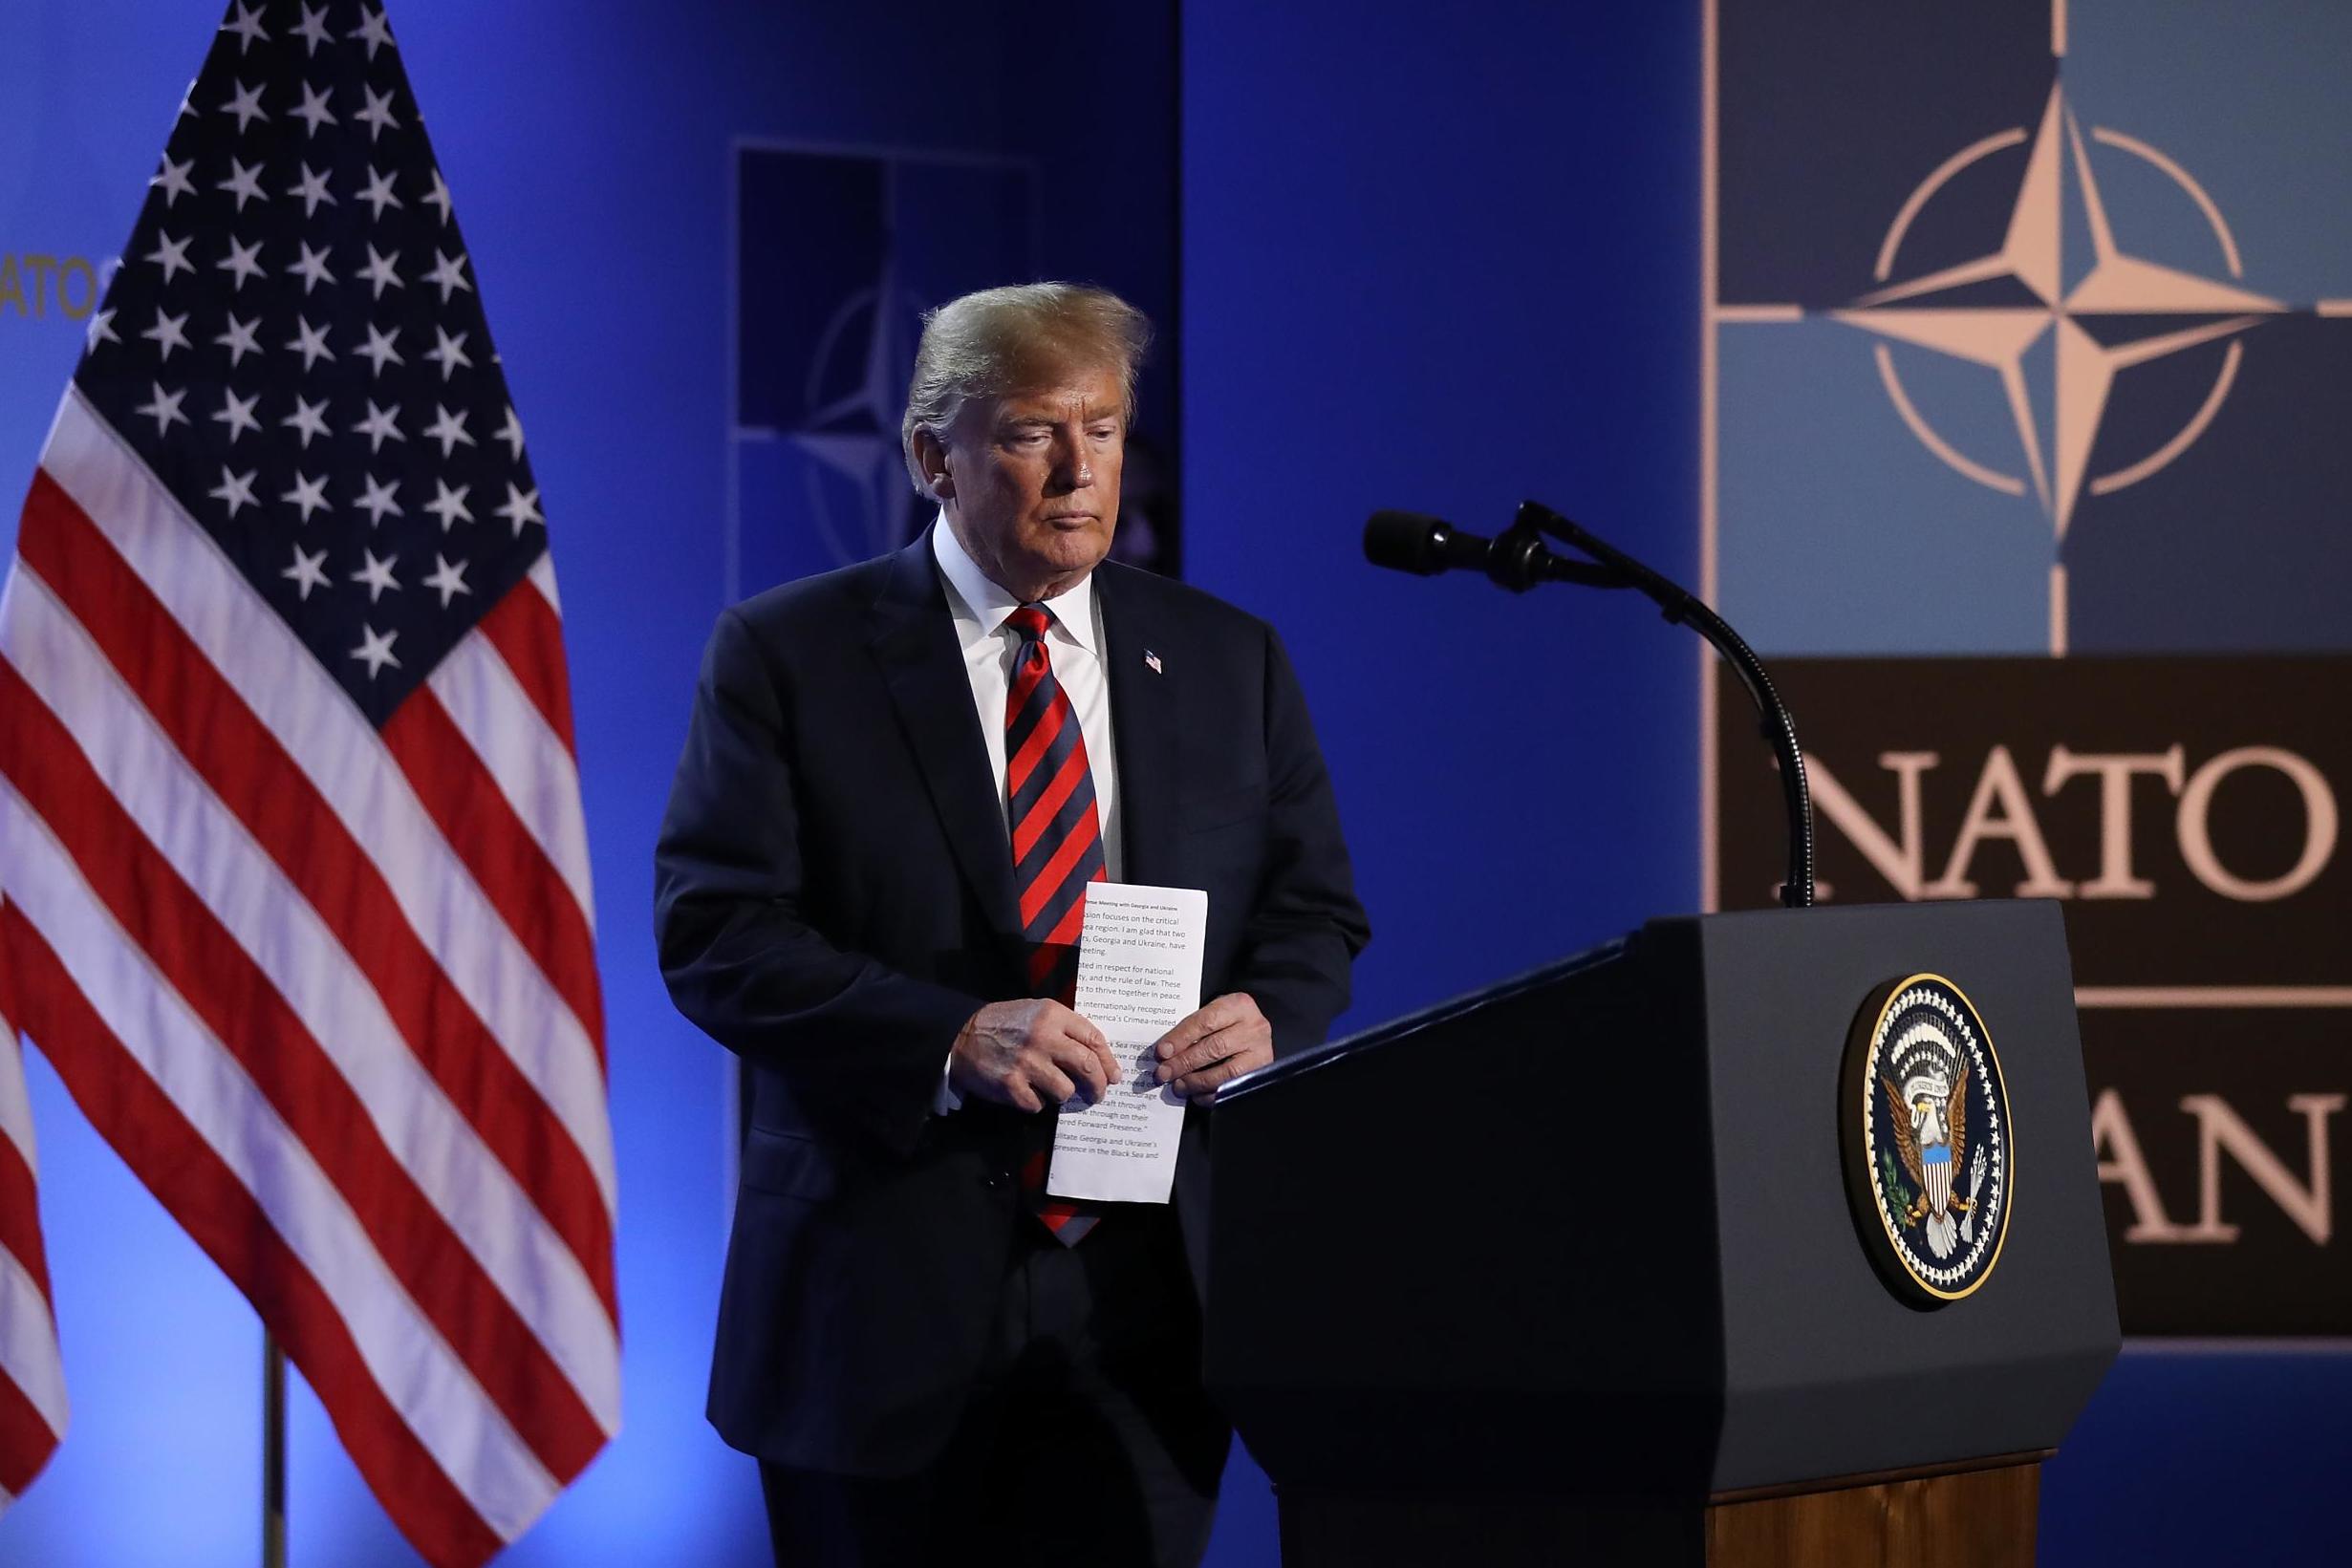 A senior White House official pointed to Mr Trump’s remarks in July when he called the US commitment to NATO “very strong” and the alliance “very important.” Pictured: US President Donald Trump on the second day of the 2018 NATO Summit, 12 July 2018 in Brussels, Belgium.